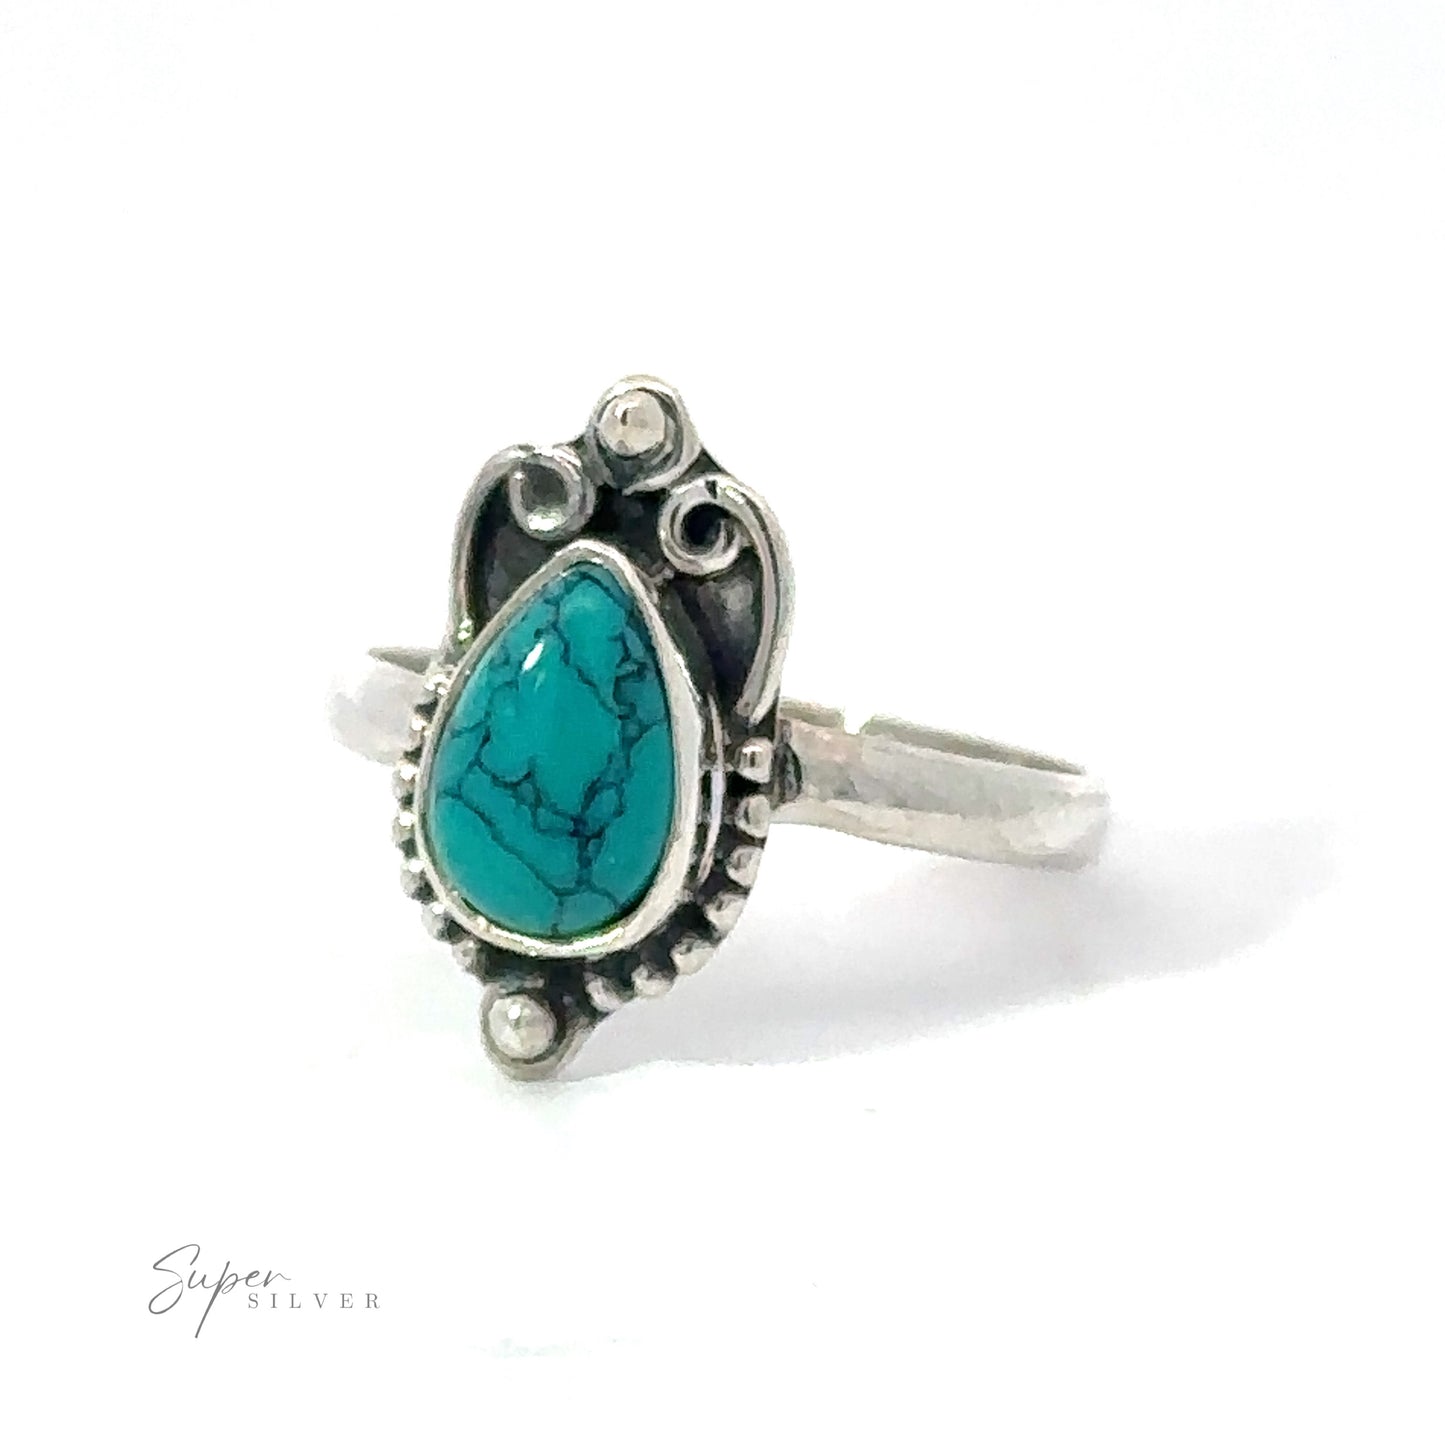 
                  
                    Sentence with Product Name included: A silver Vintage Inspired Teardrop Gemstone Ring featuring a teal turquoise teardrop gemstone set in an ornate bezel, isolated on a white background.
                  
                